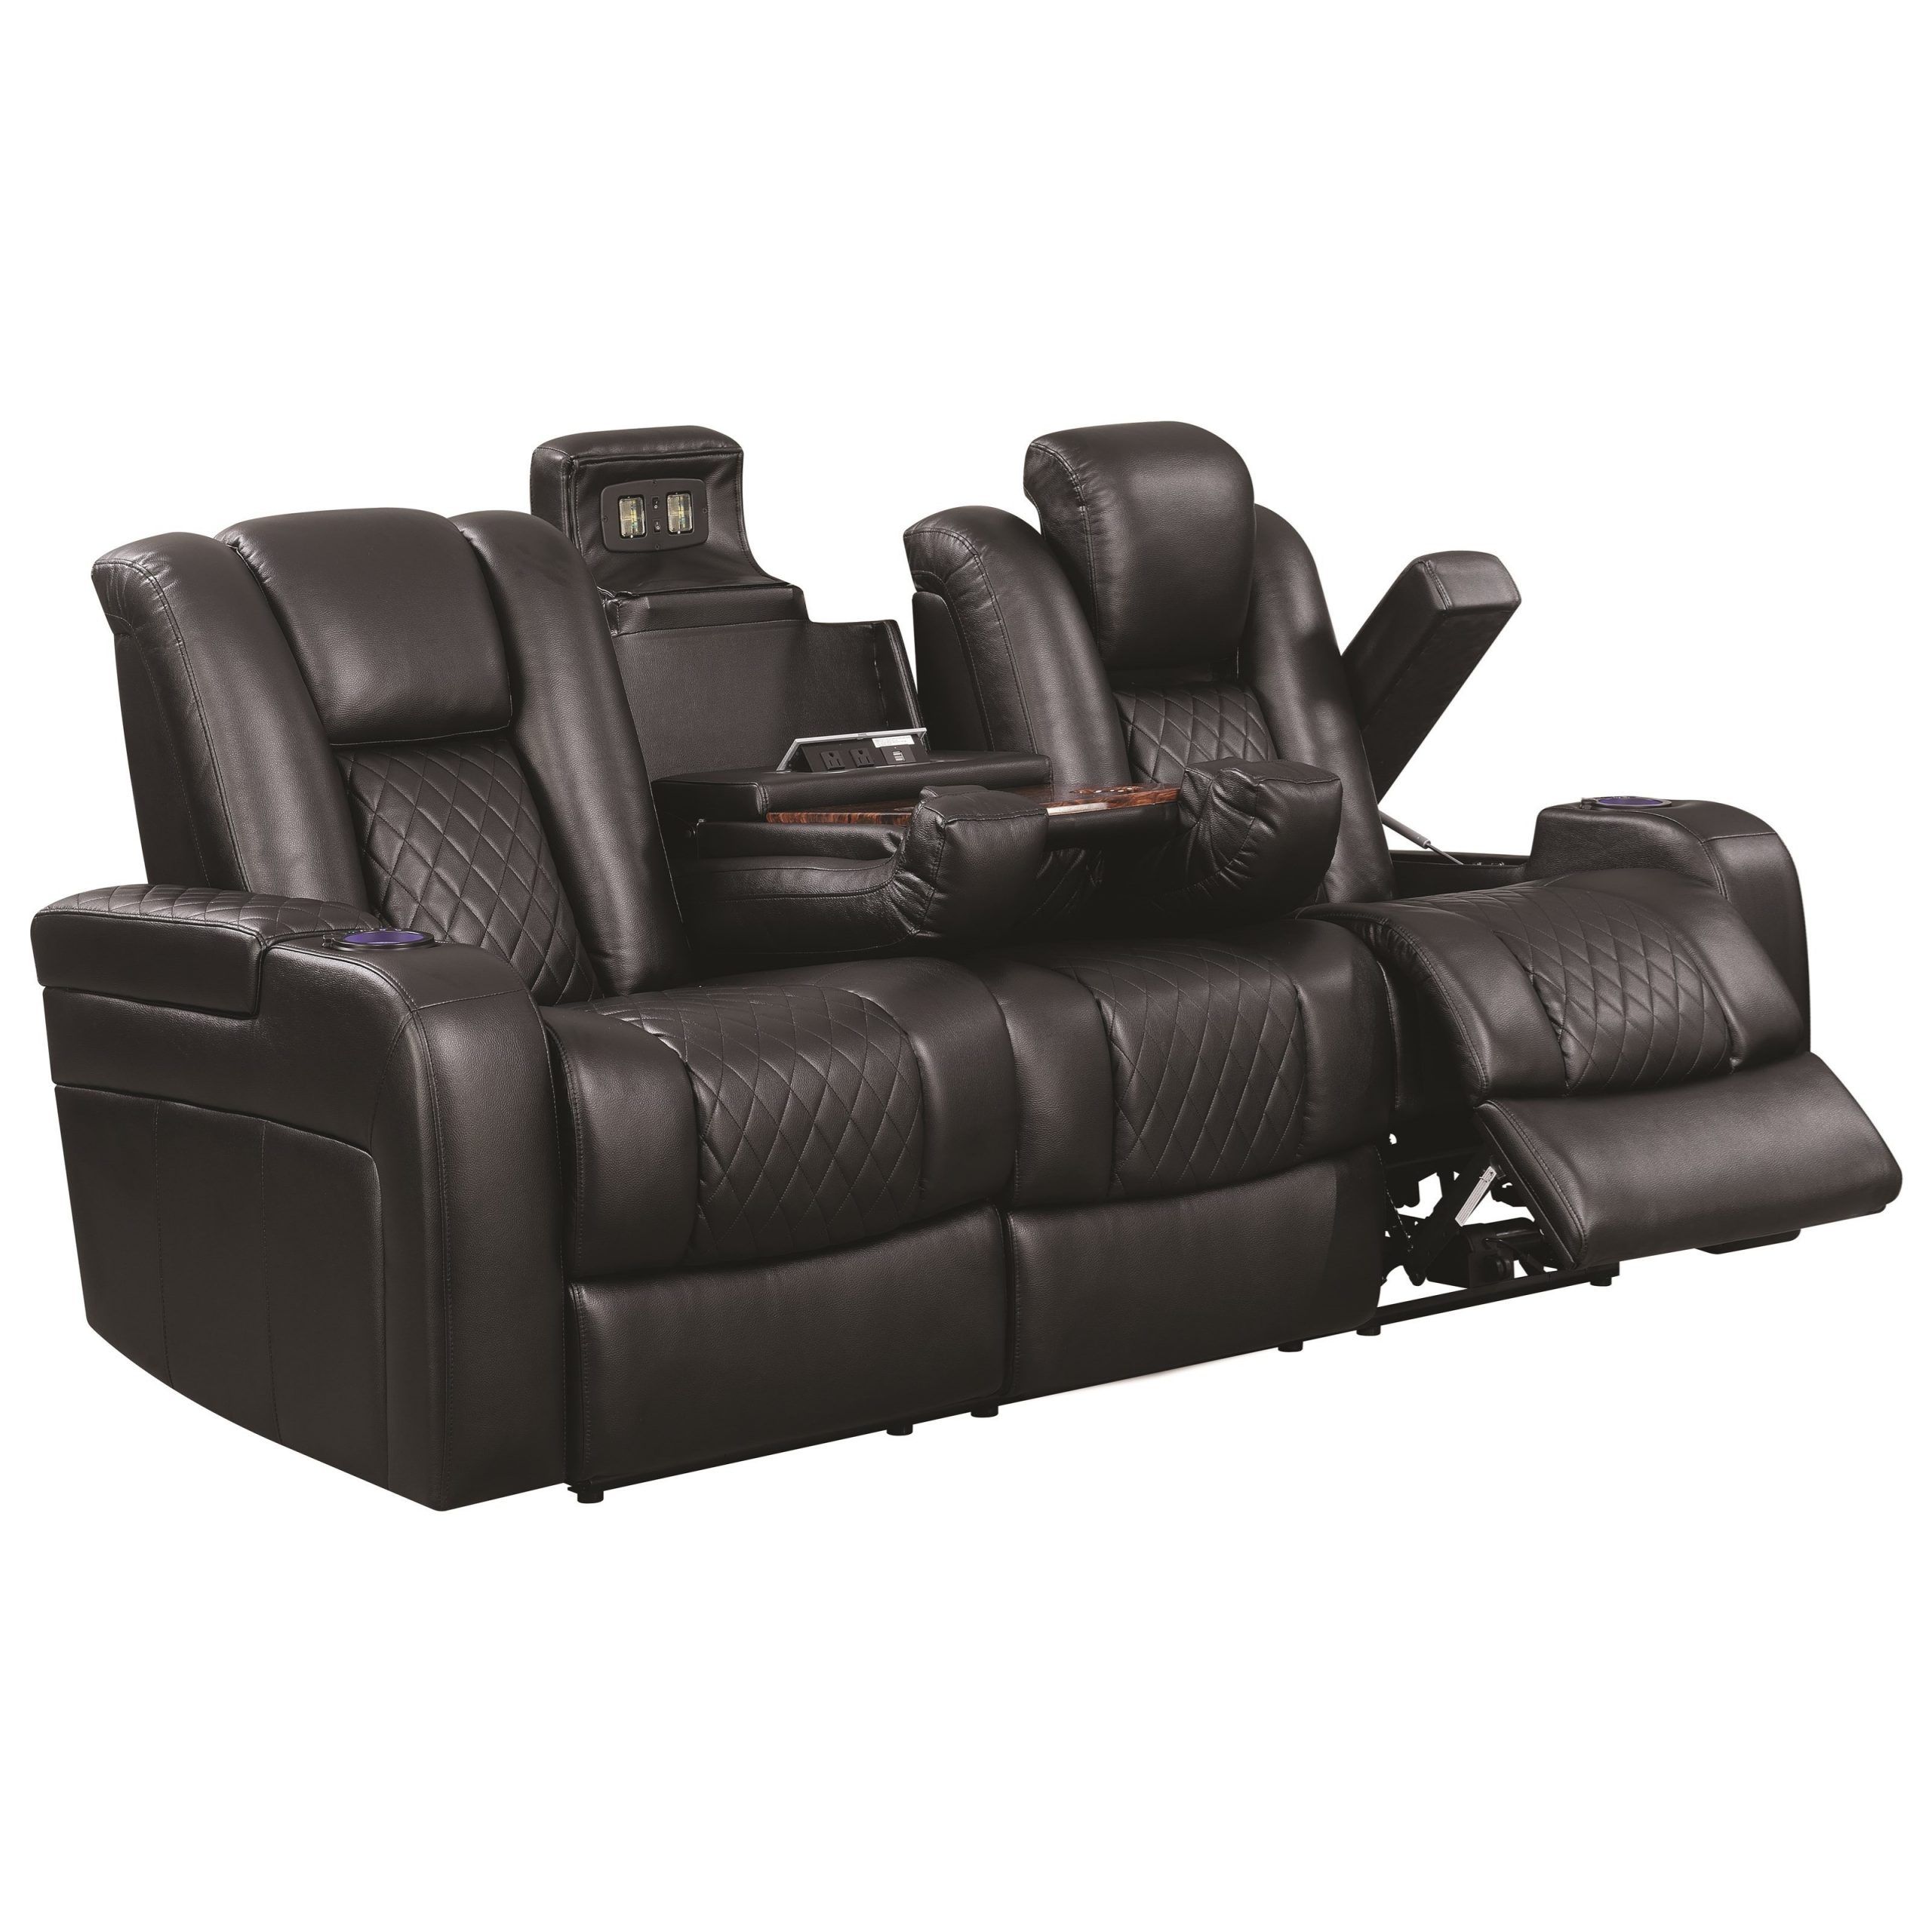 Delangelo Theater Power Leather Reclining Sofa With Cup Holders Regarding Espresso Faux Leather Ac And Usb Ottomans (View 12 of 20)